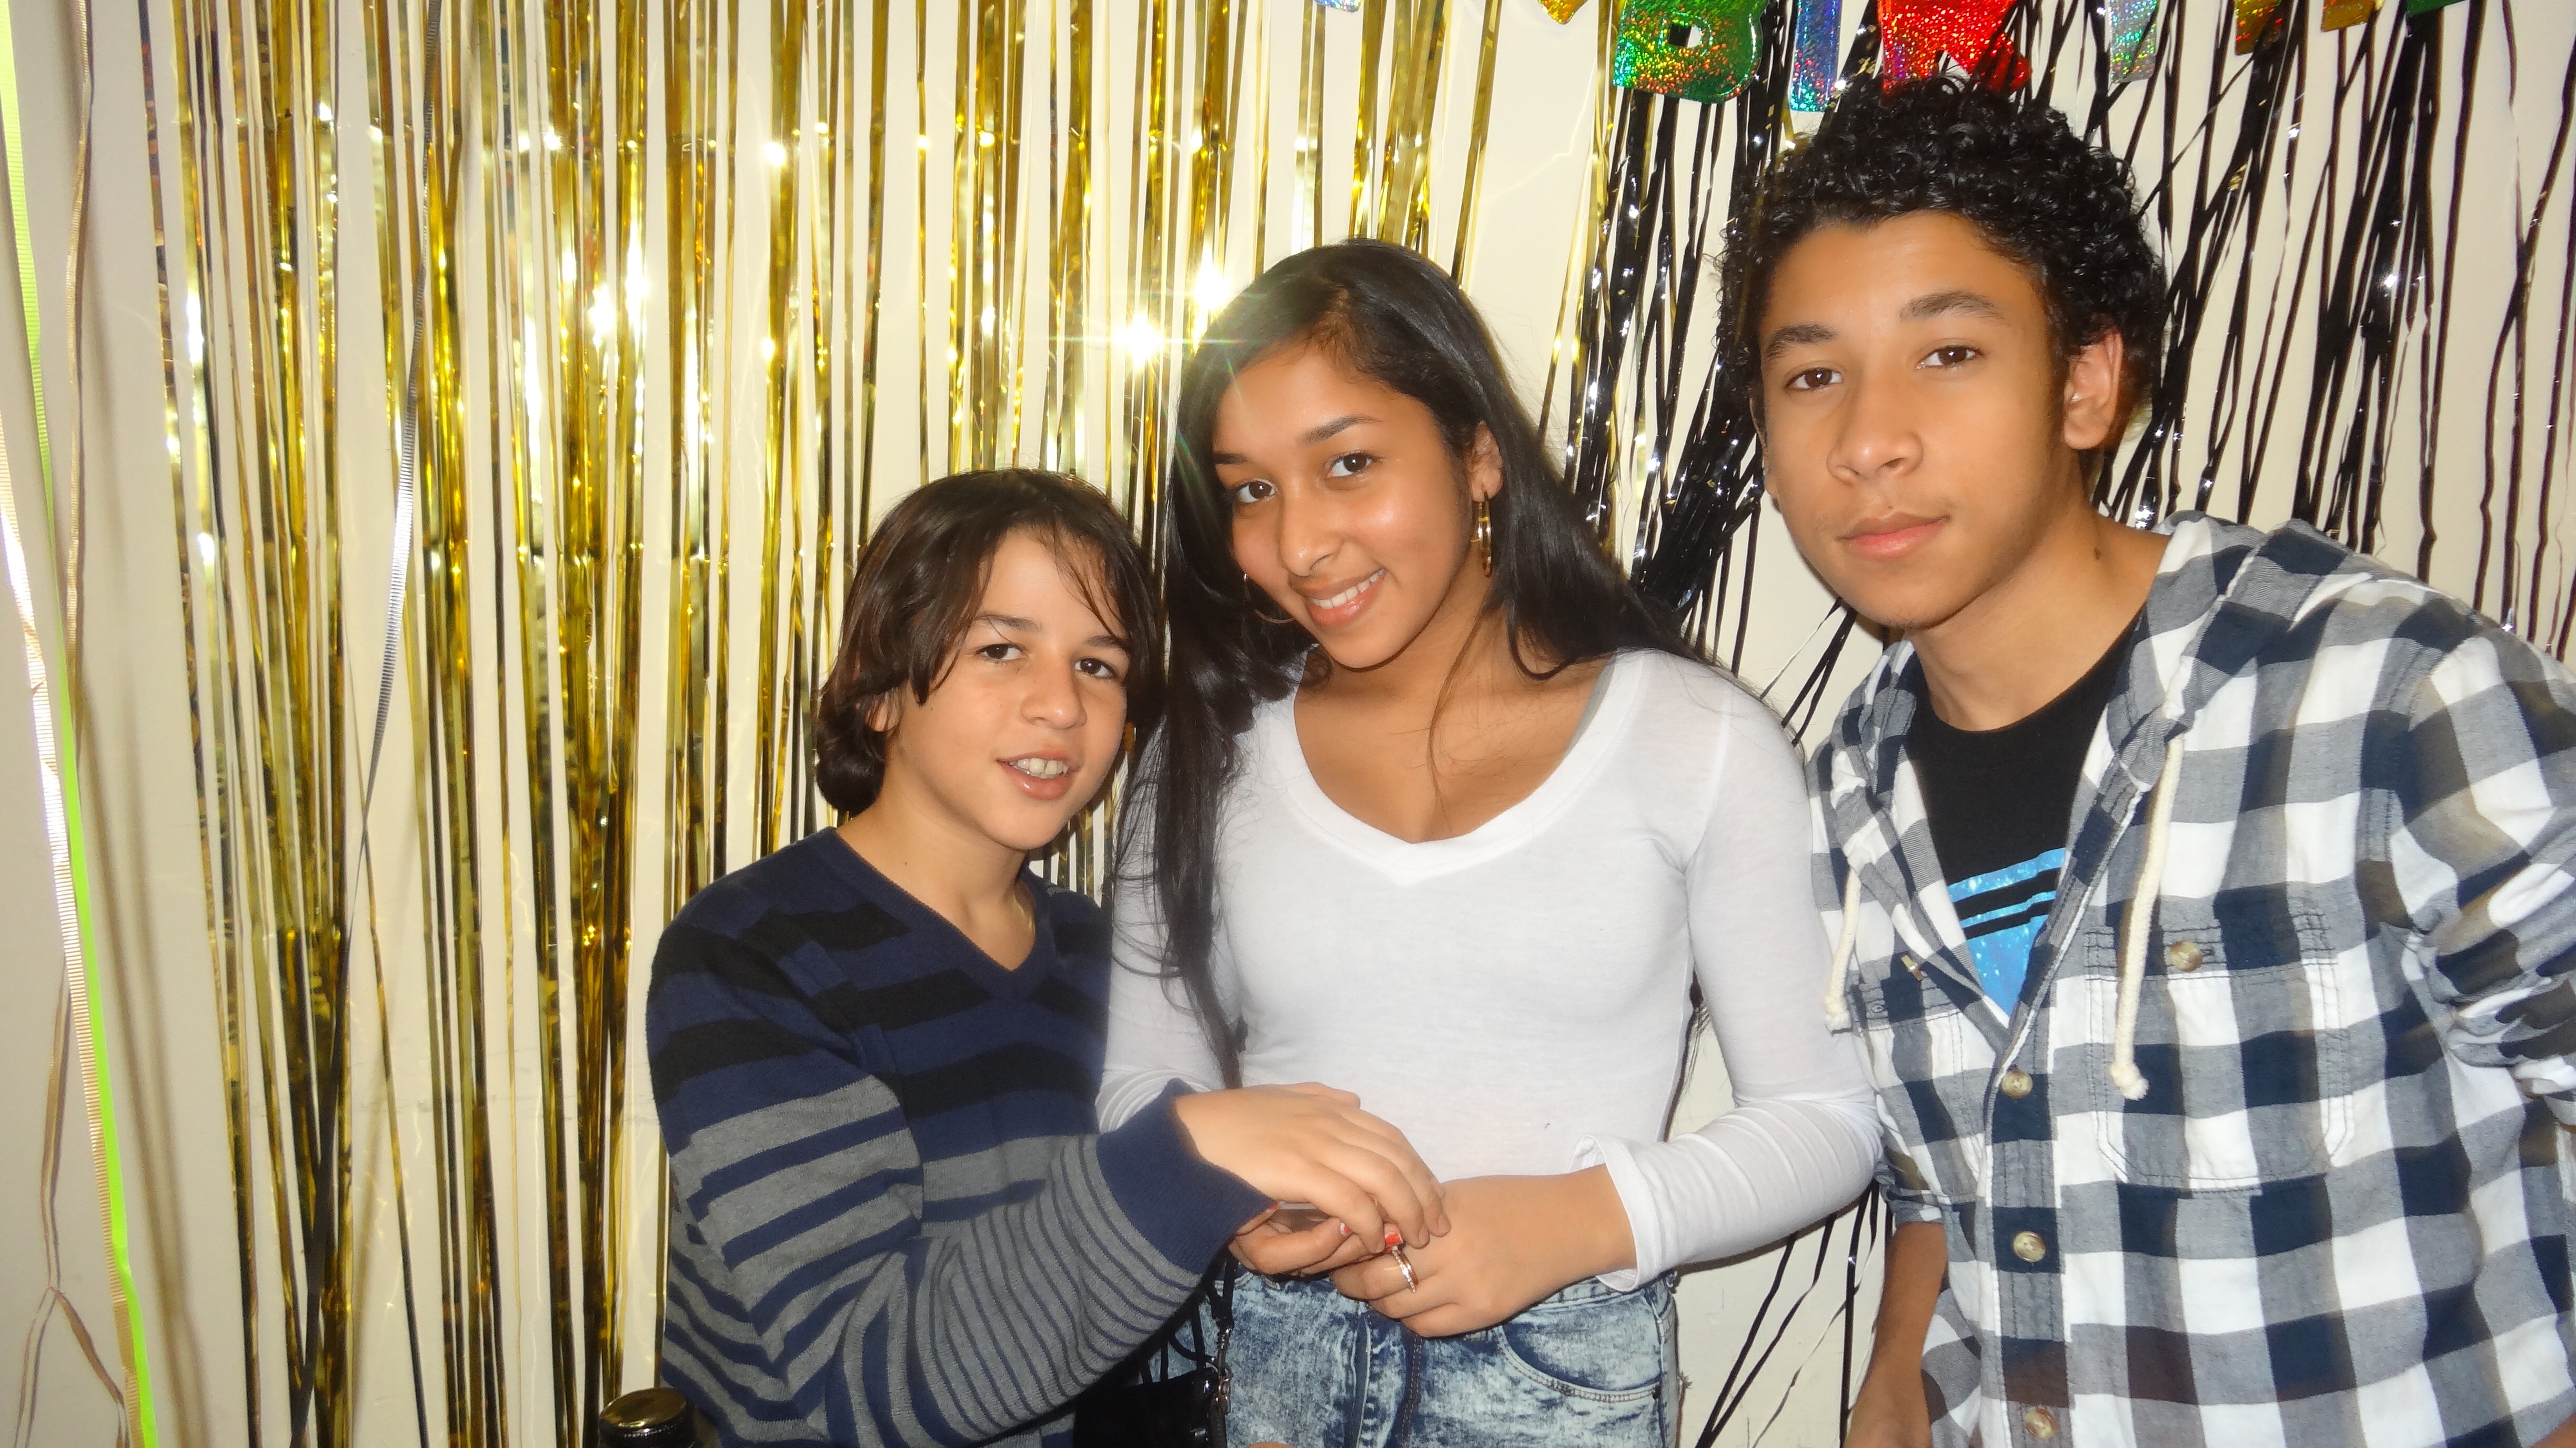 Rosanna Ramdeo with my brother and cousin